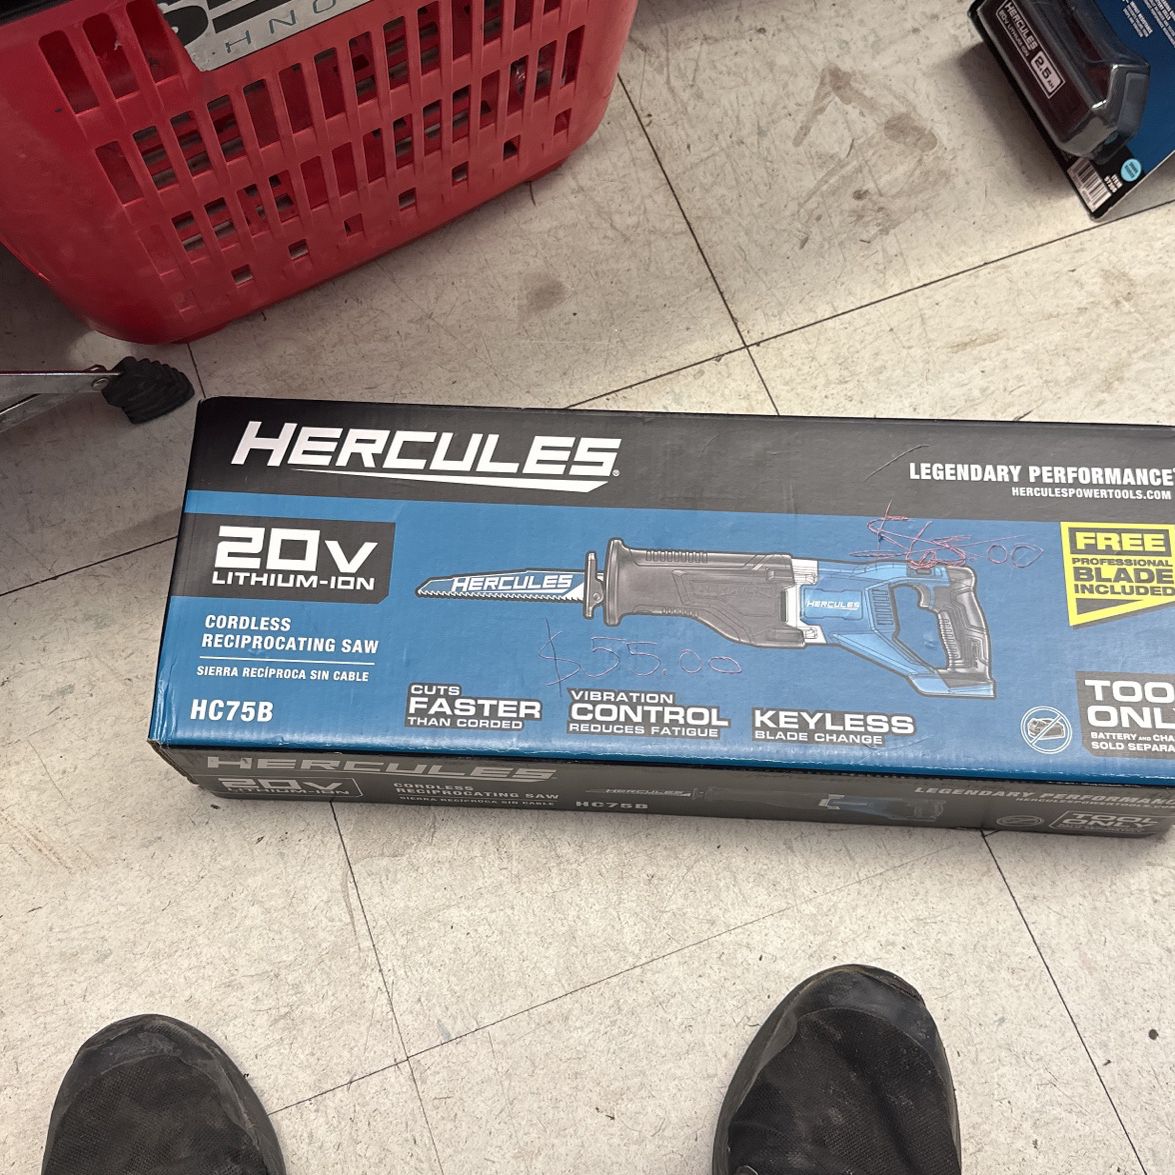 20 V Hercules Cordless Reciprocating Saw NEW for Sale in Hemet, CA OfferUp